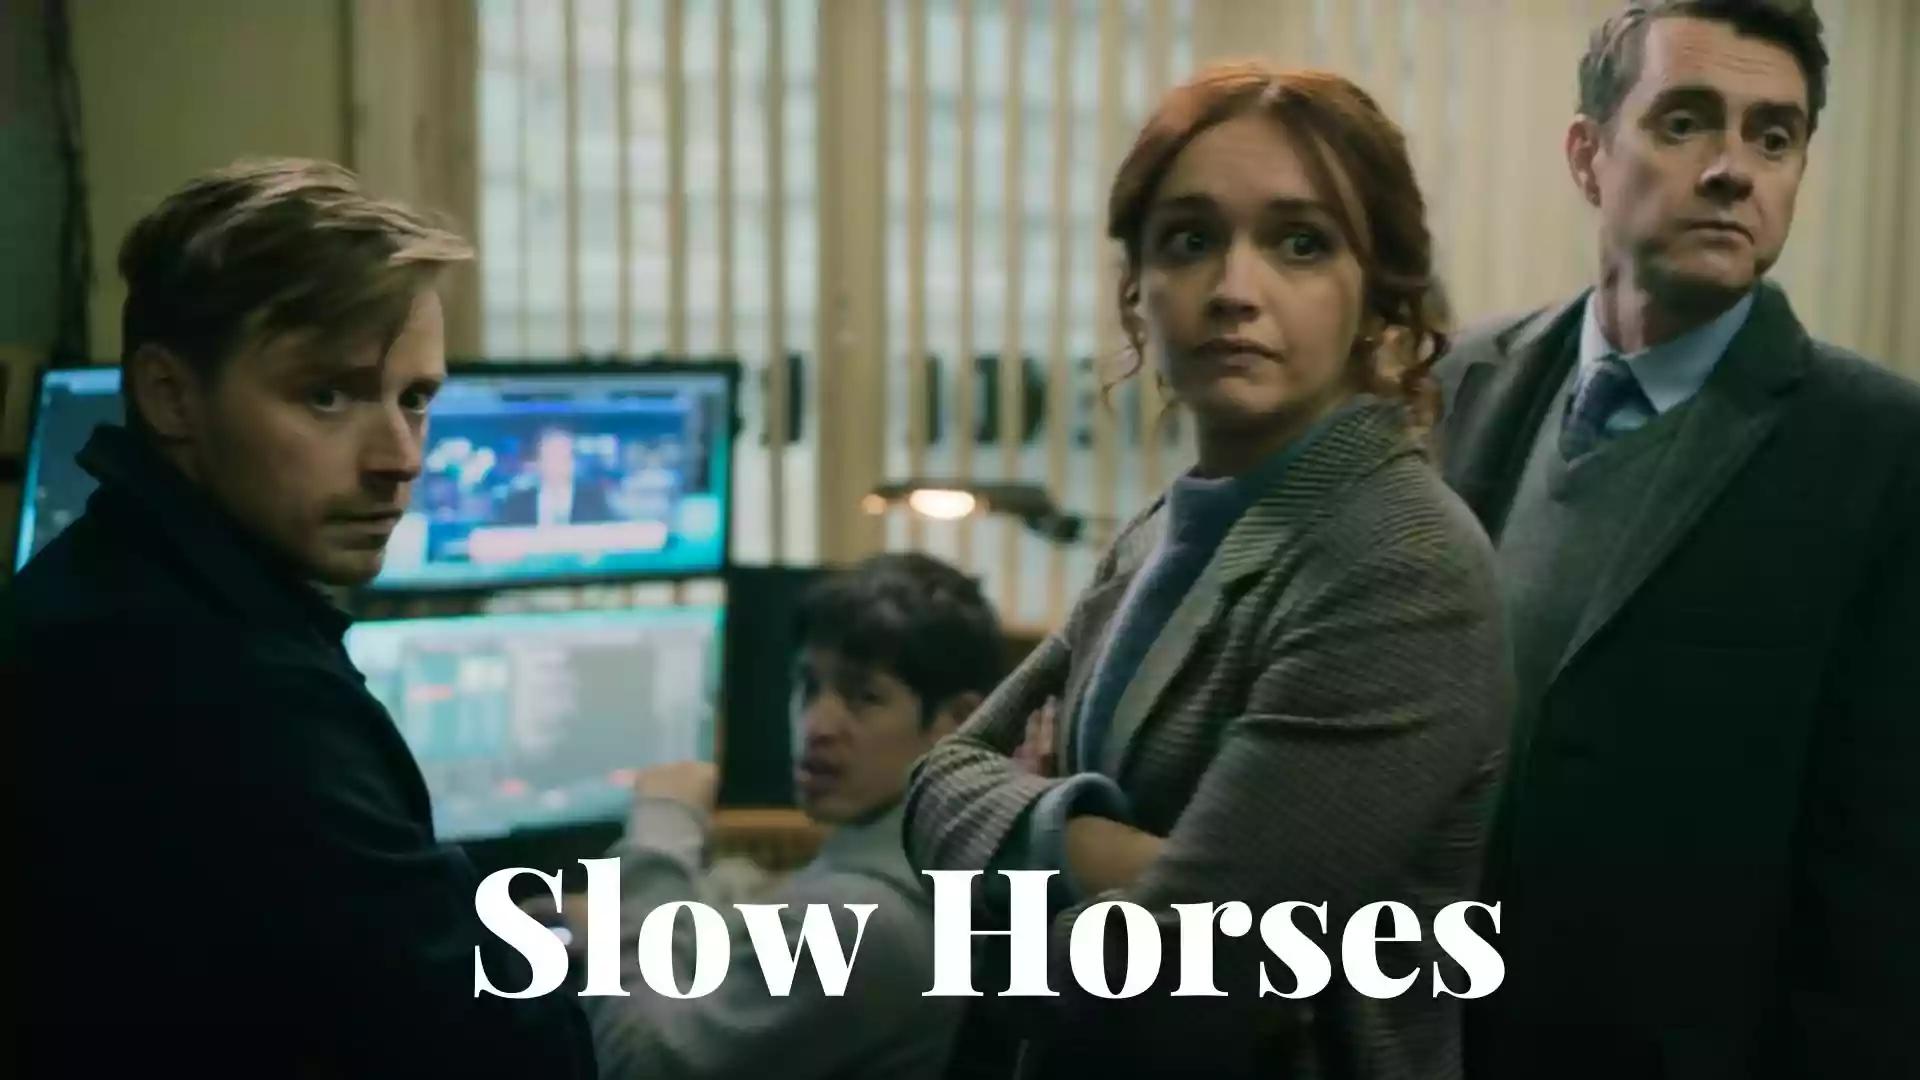 Slow Horses Parents Guide and Age Rating